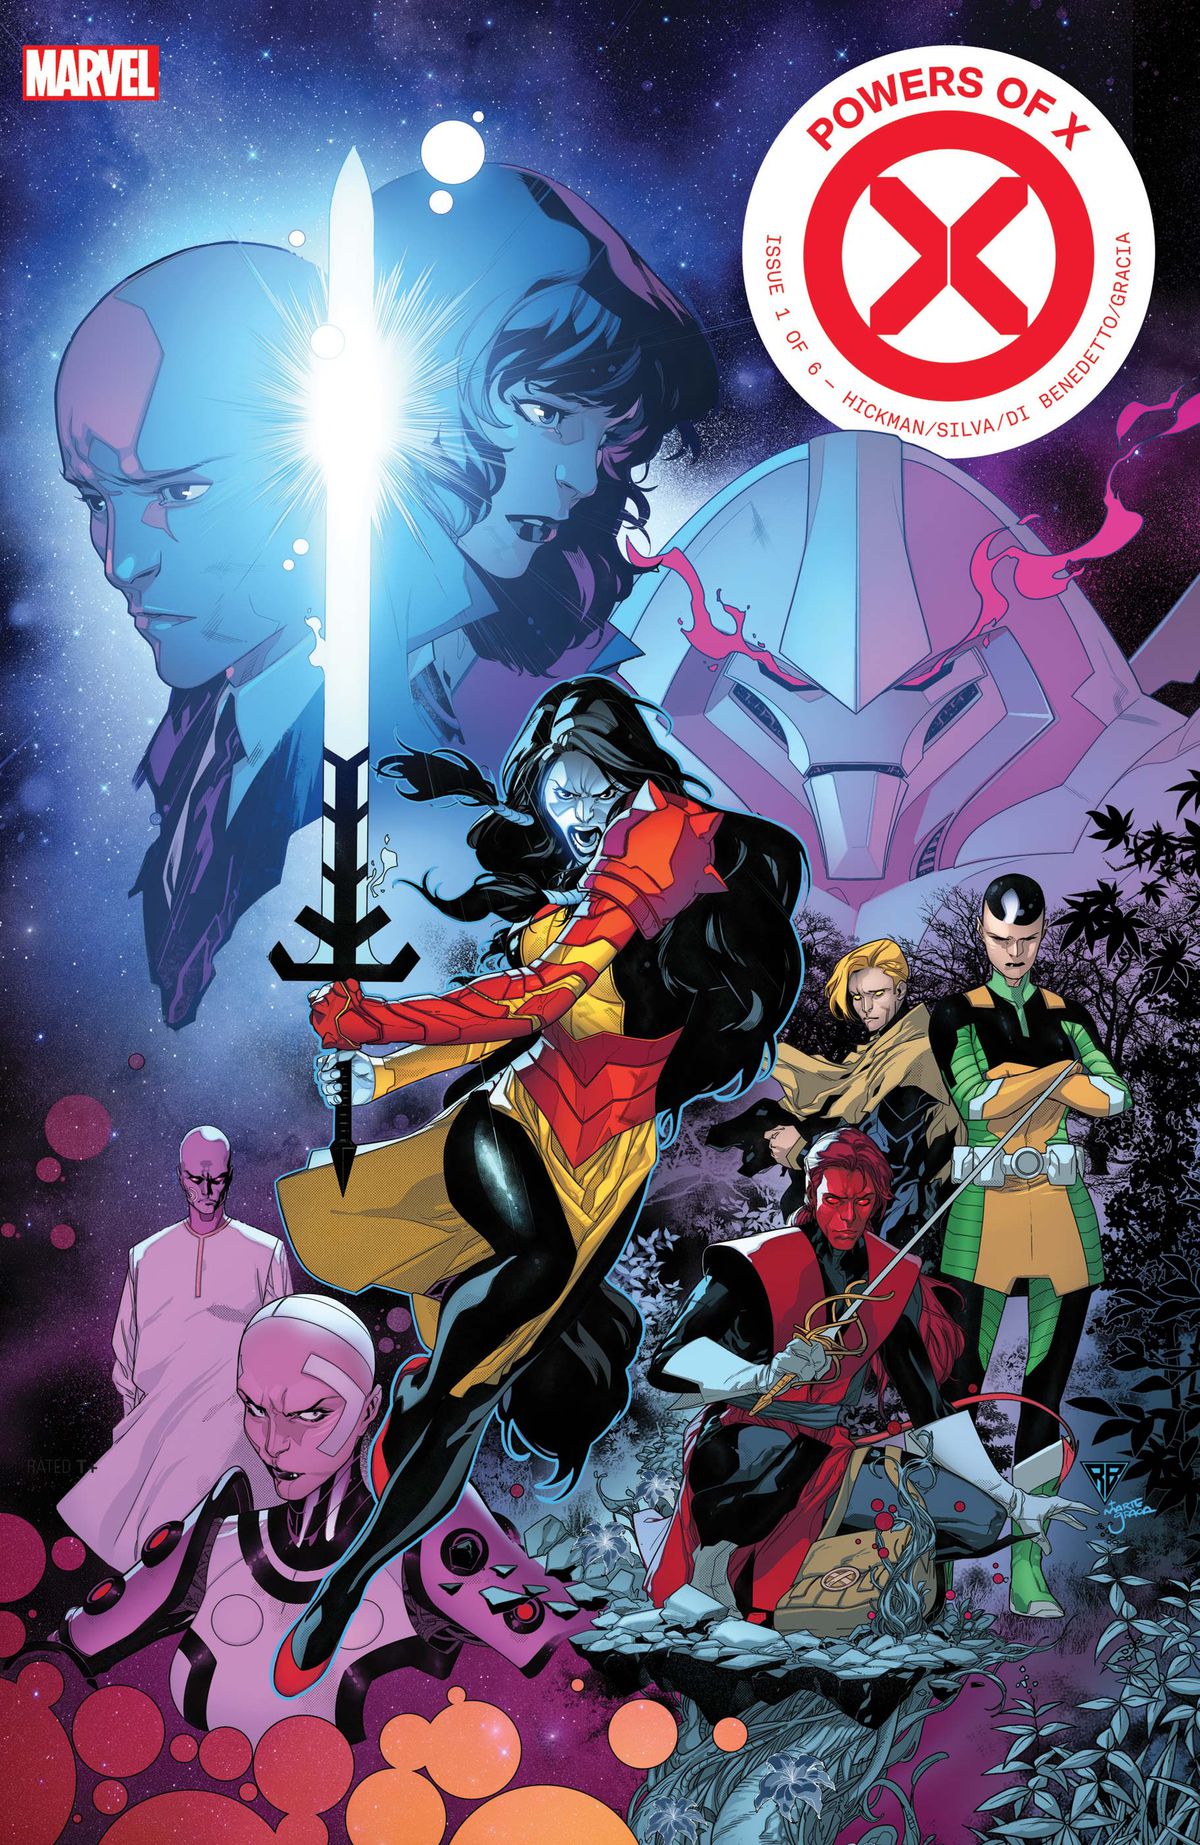 The mutant soldier Rasputin, wielding a massive energy sword, front and center on the cover of Powers of X #1, Marvel Comics (2019).